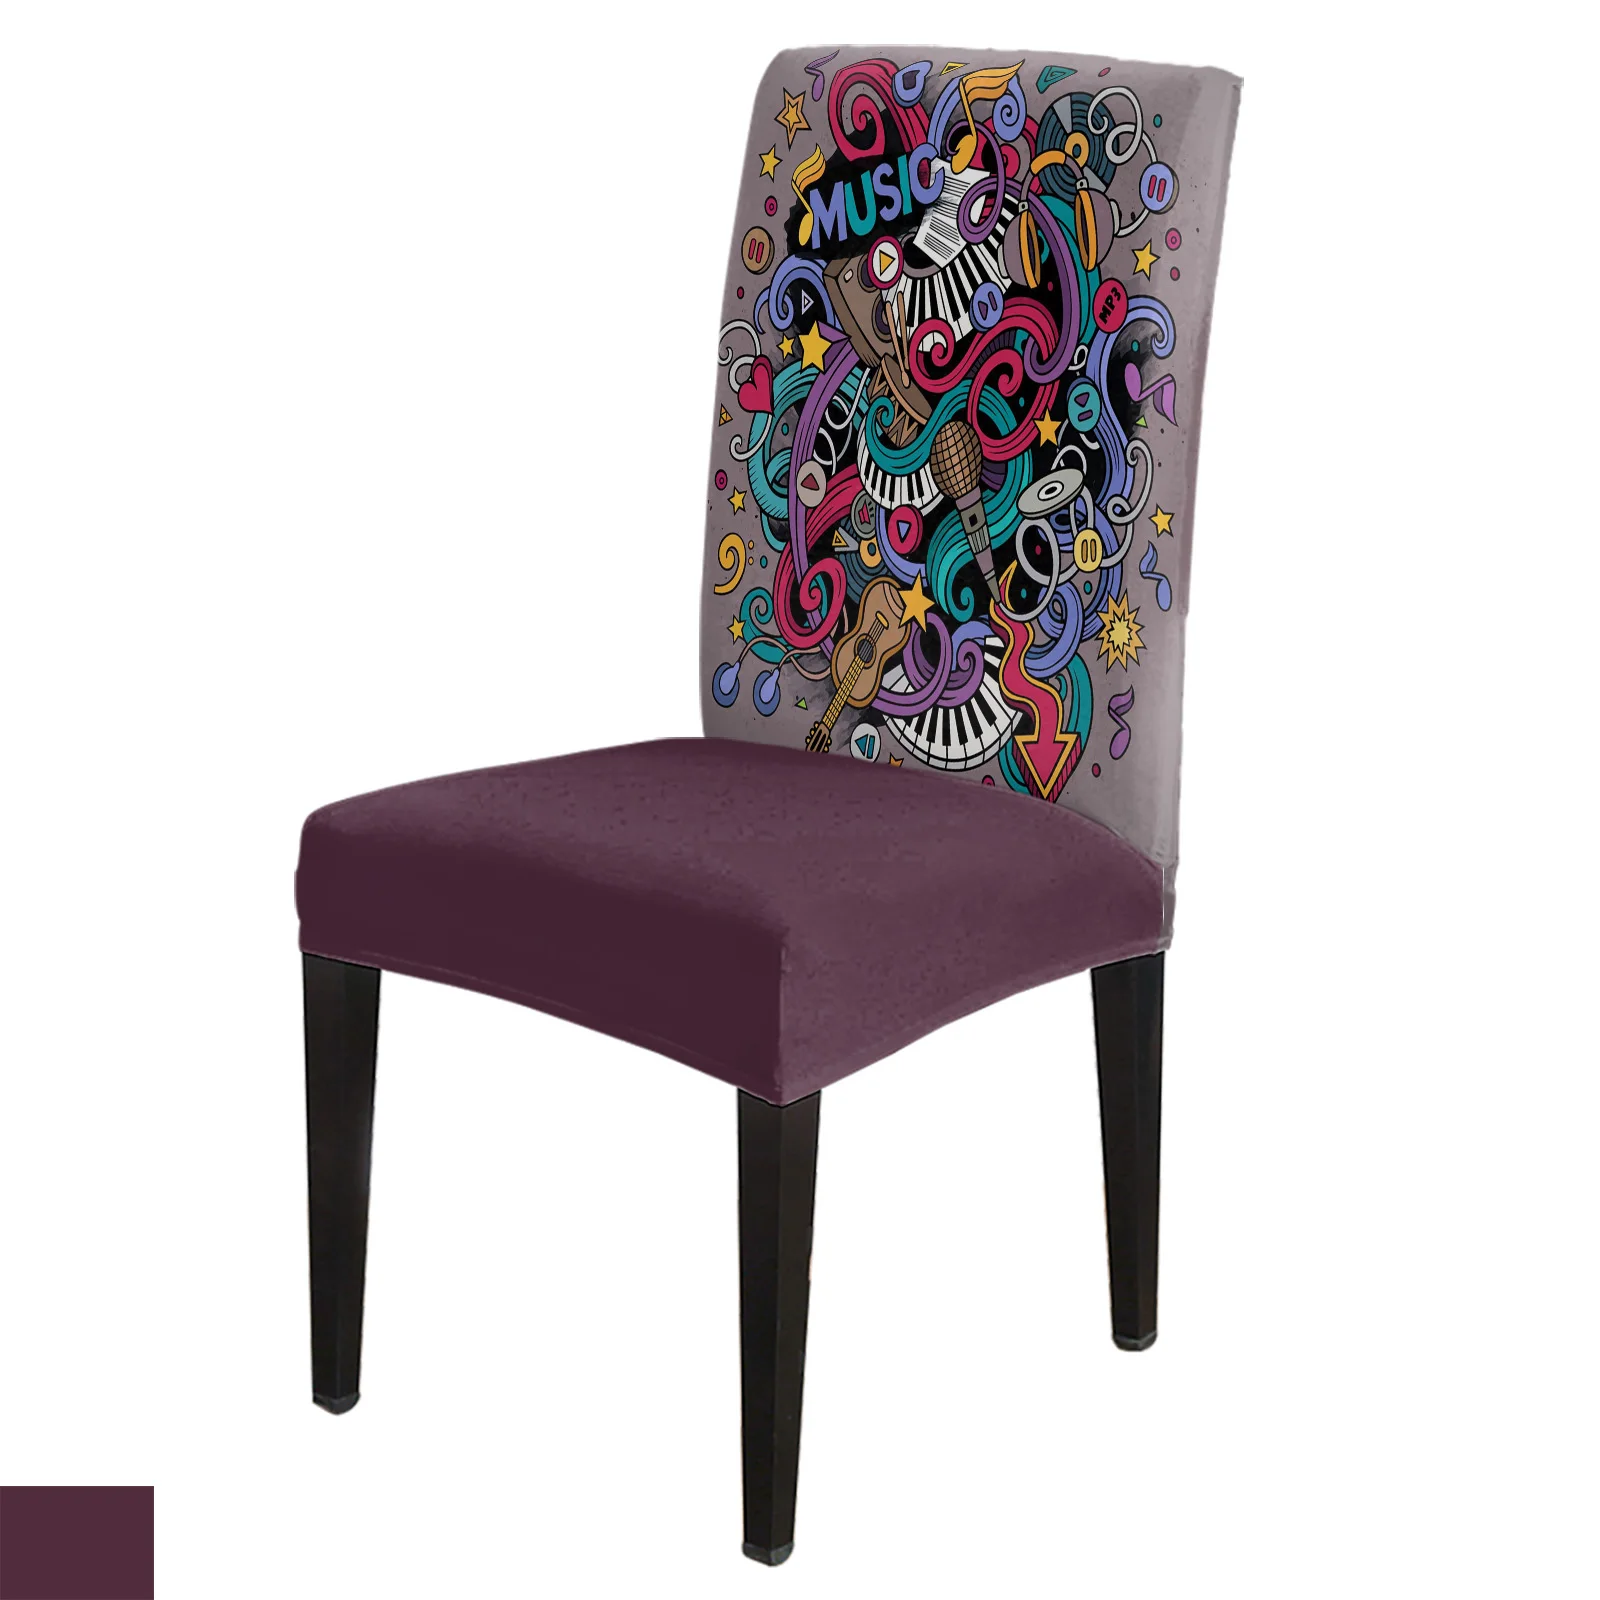 

Graffiti Music Colorful Rock And Roll Chair Cover Set Kitchen Dining Stretch Spandex Seat Slipcover for Banquet Wedding Party